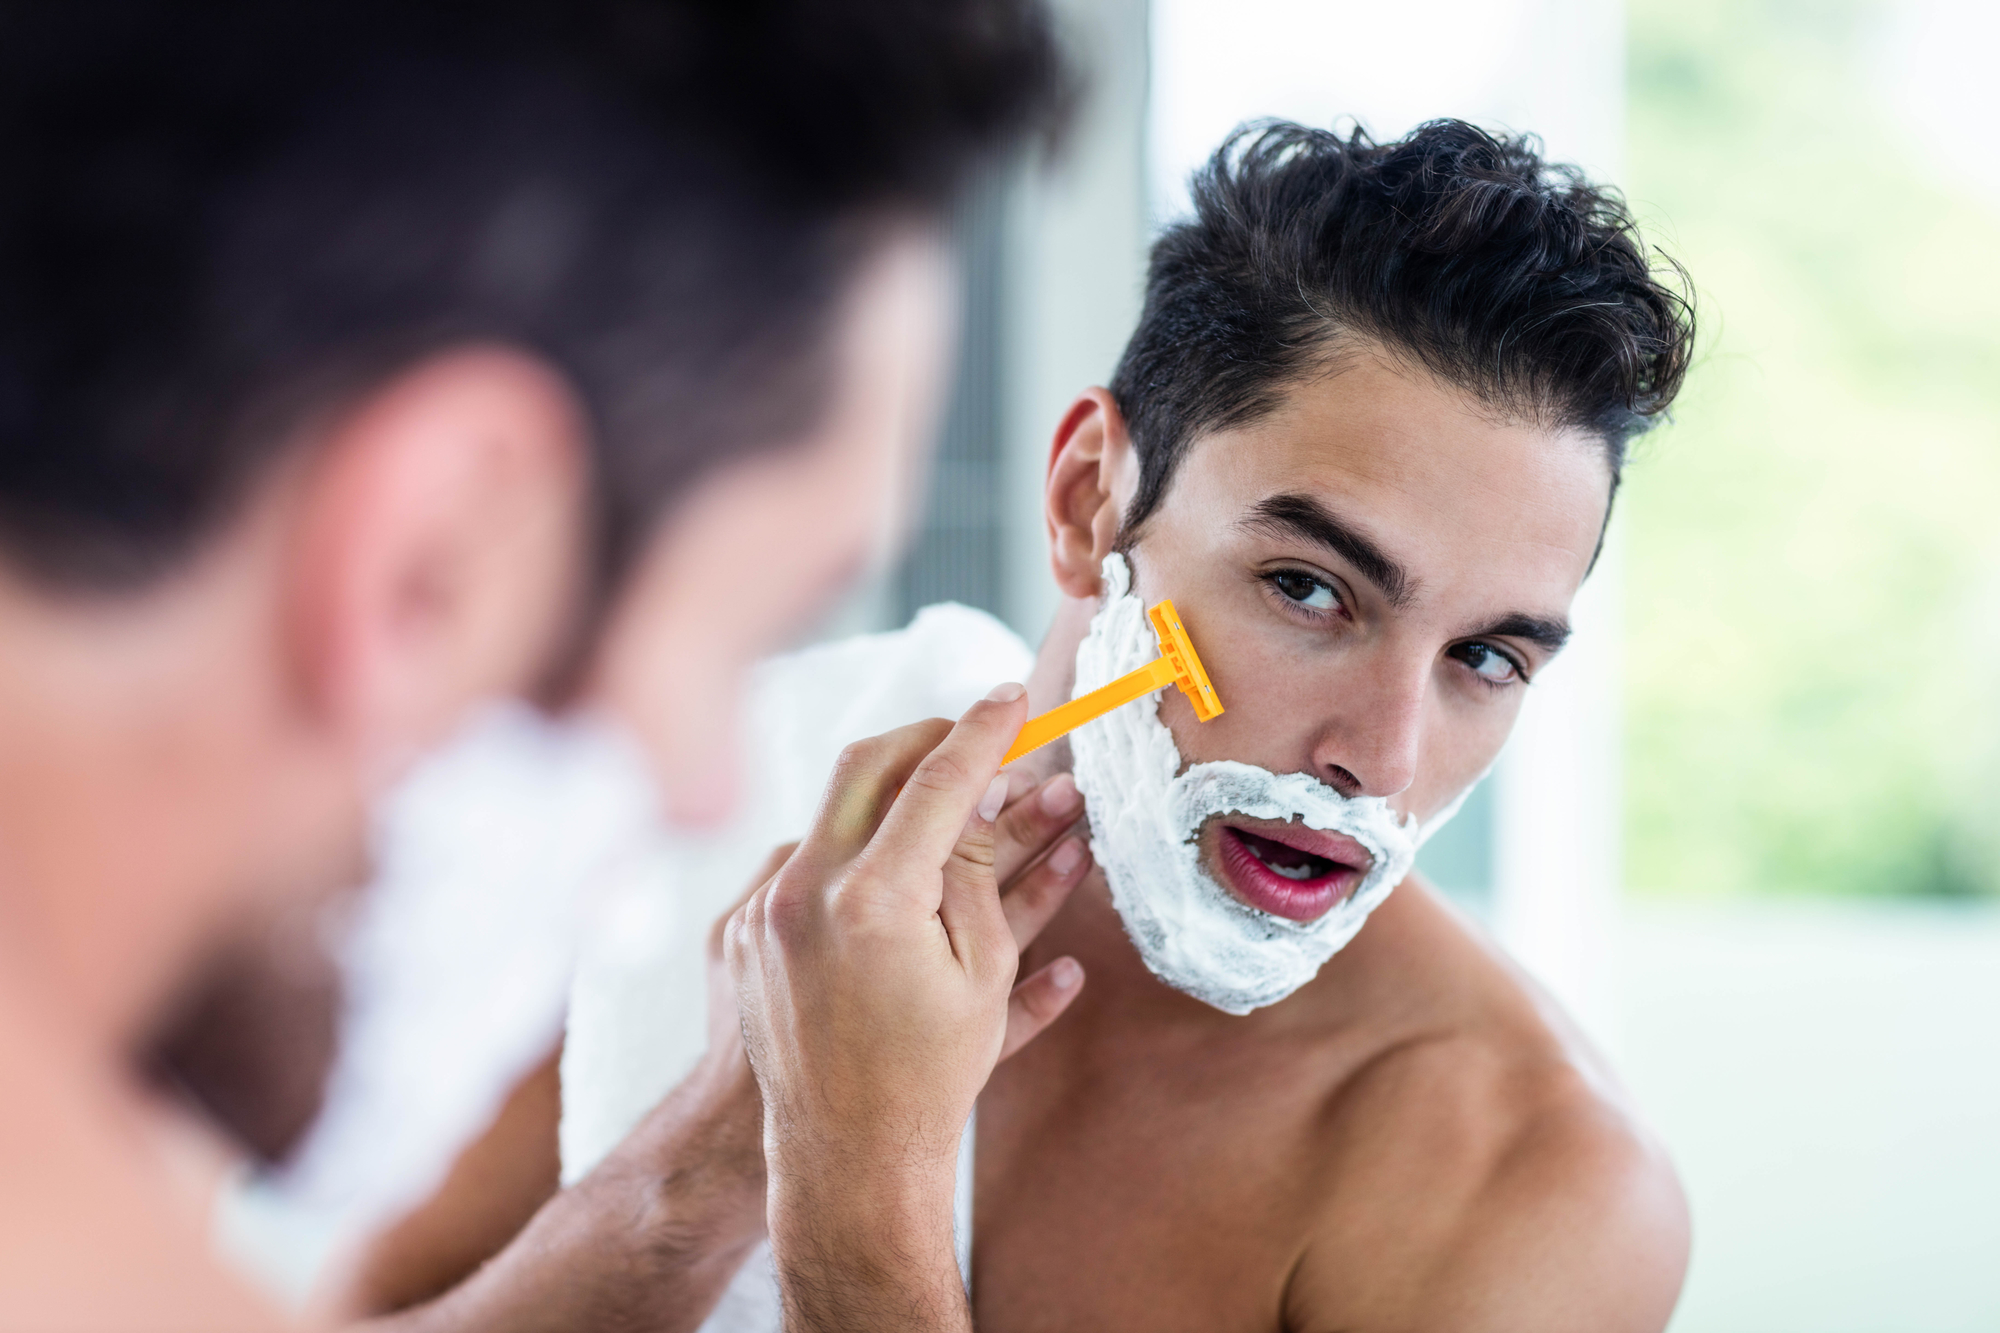 Shaving Tips For Men How To Get A Close Shave Without Razor Burn